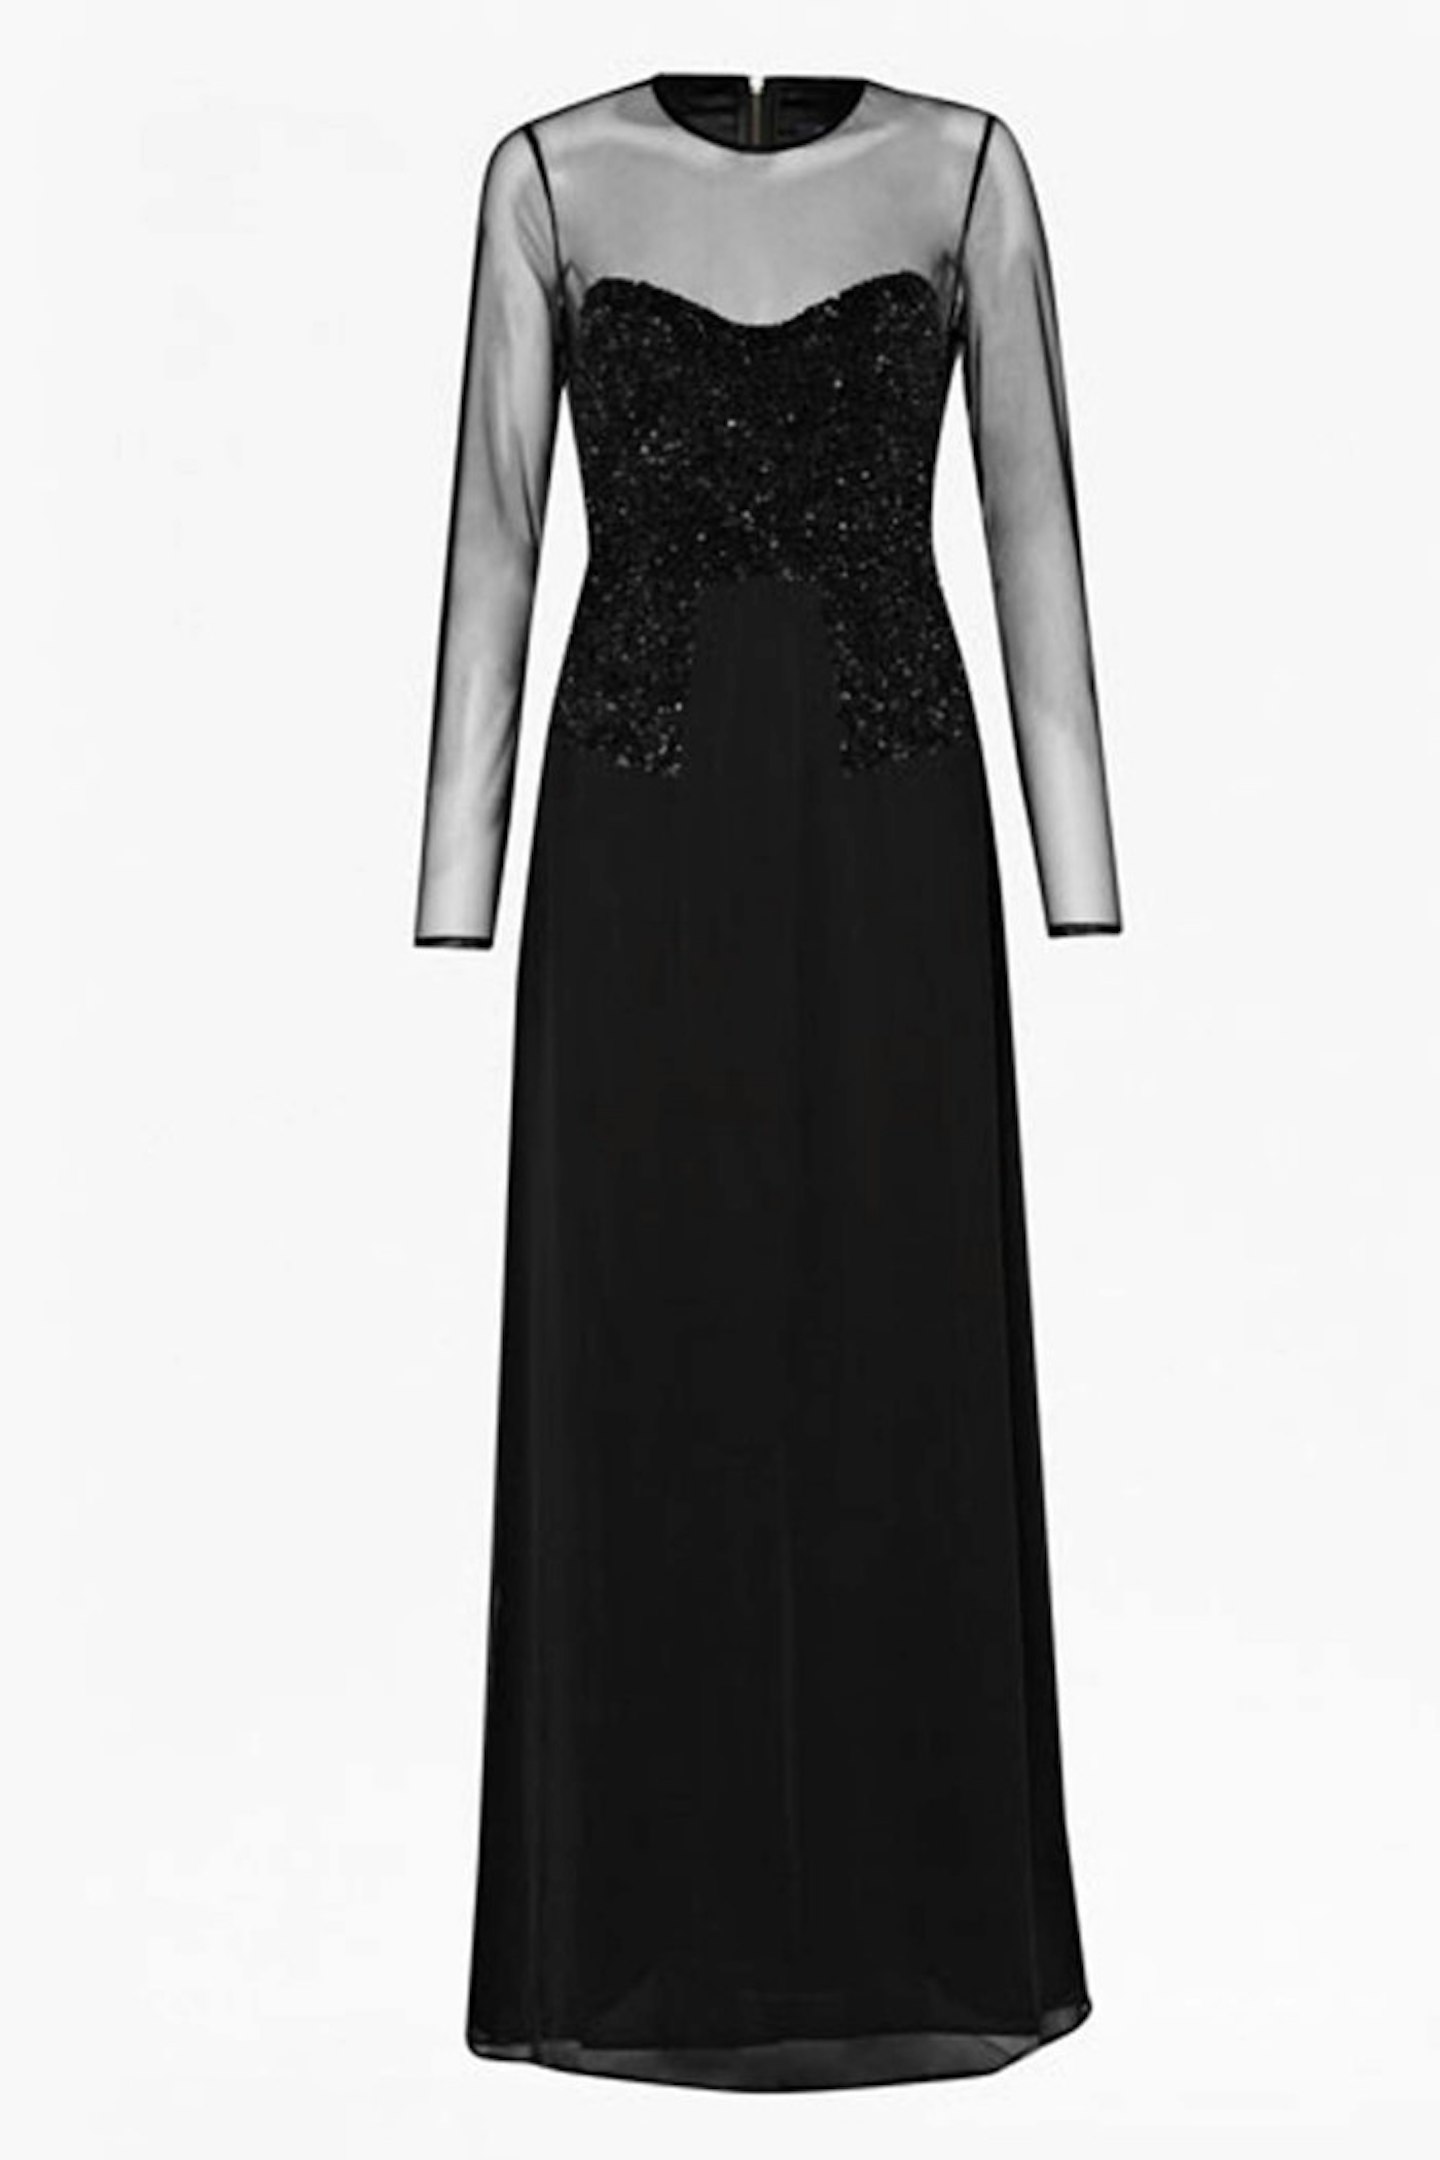 Black maxi evening dress with mesh body and sequinned bodice overlay, £190, French Connection